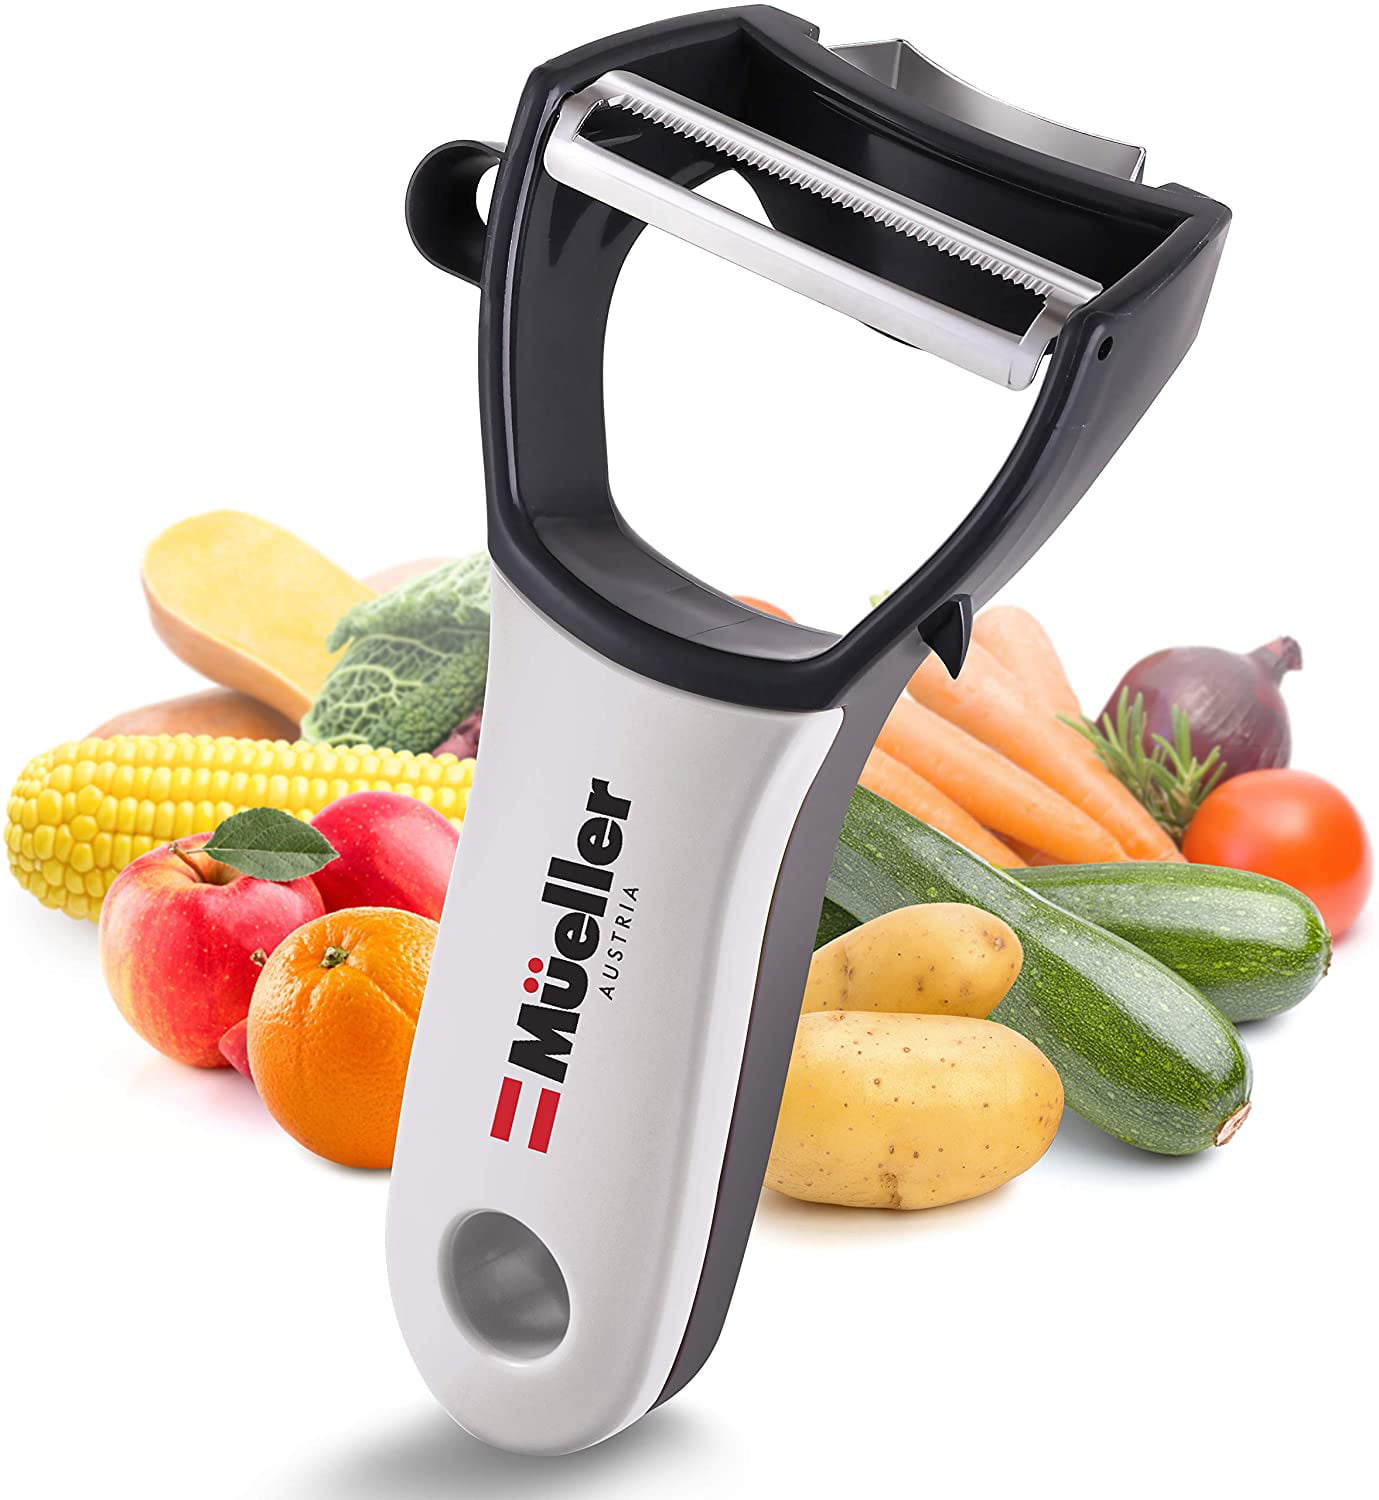 Carrots Julienne Blades-Julienne Y Kitchen Peeler for Apples Cucumbers Serrated Vegetable Peeler 3 in 1 Fruit Peeler with 3 Rotatable Extra Sharp Blades- Straight Potatoes